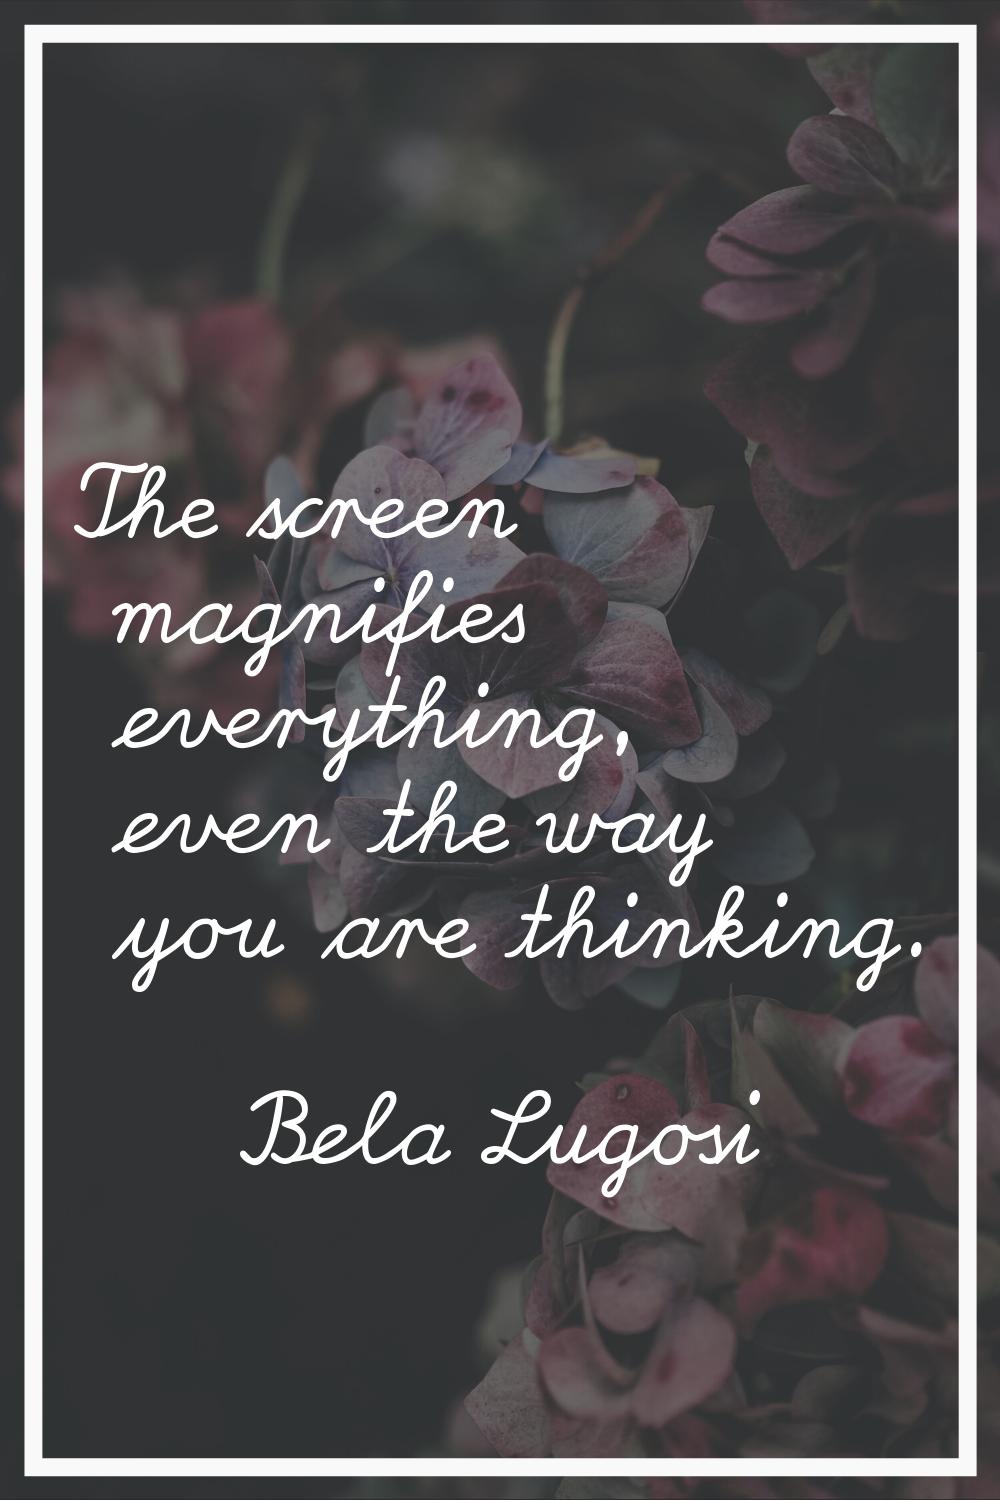 The screen magnifies everything, even the way you are thinking.